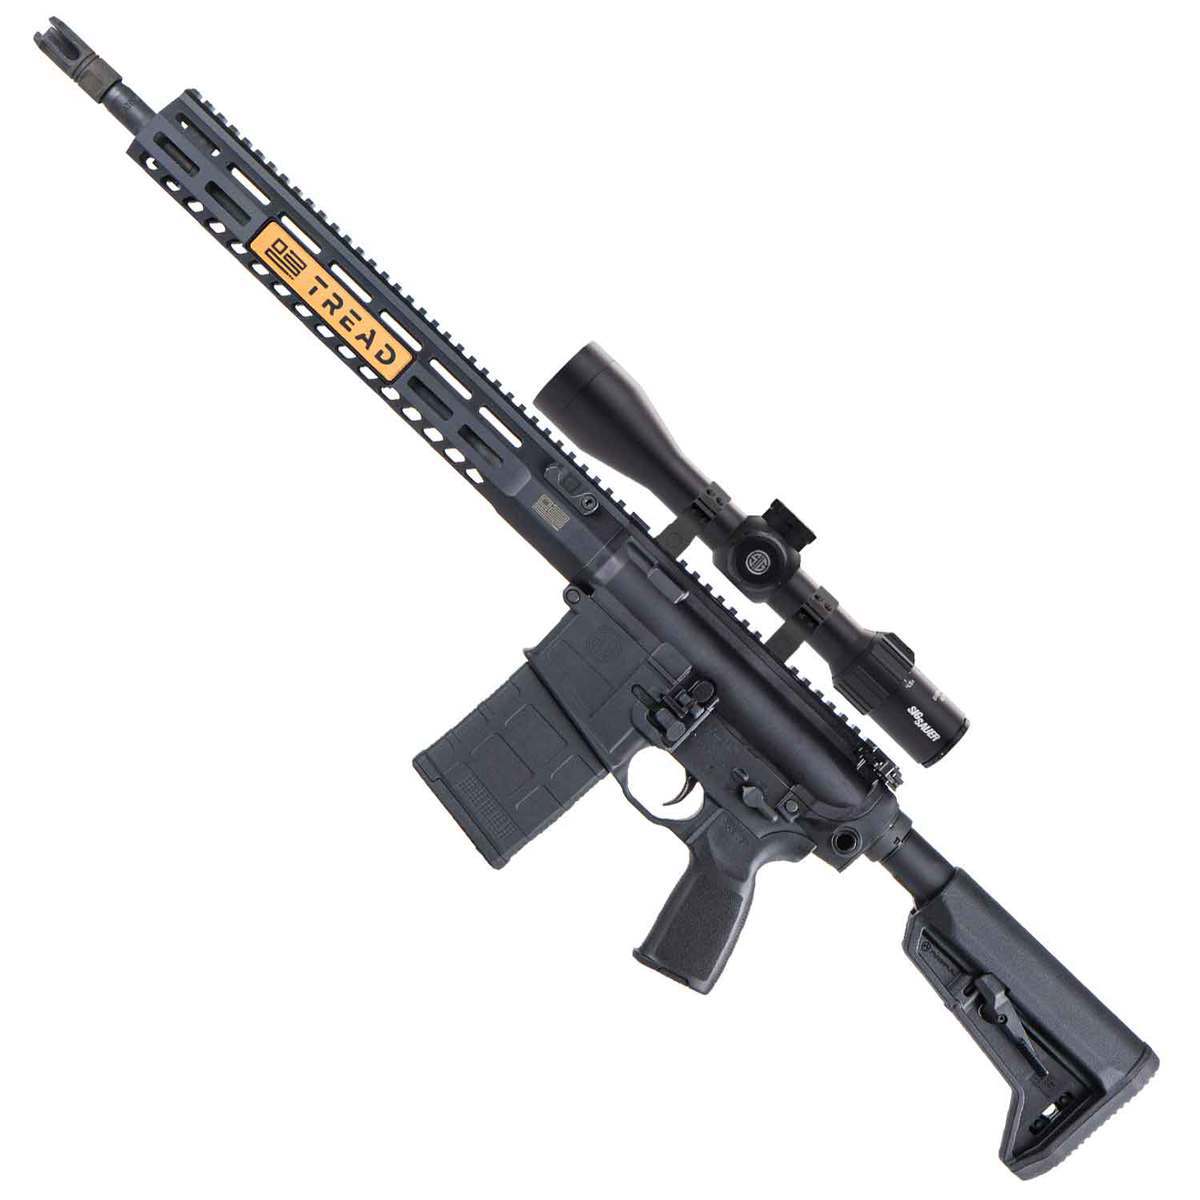 sig sauer 716i tread with sierra3 45 14x44mm scope 308 winchester 16in black semi automatic modern sporting rifle 201 rounds 1676204 1